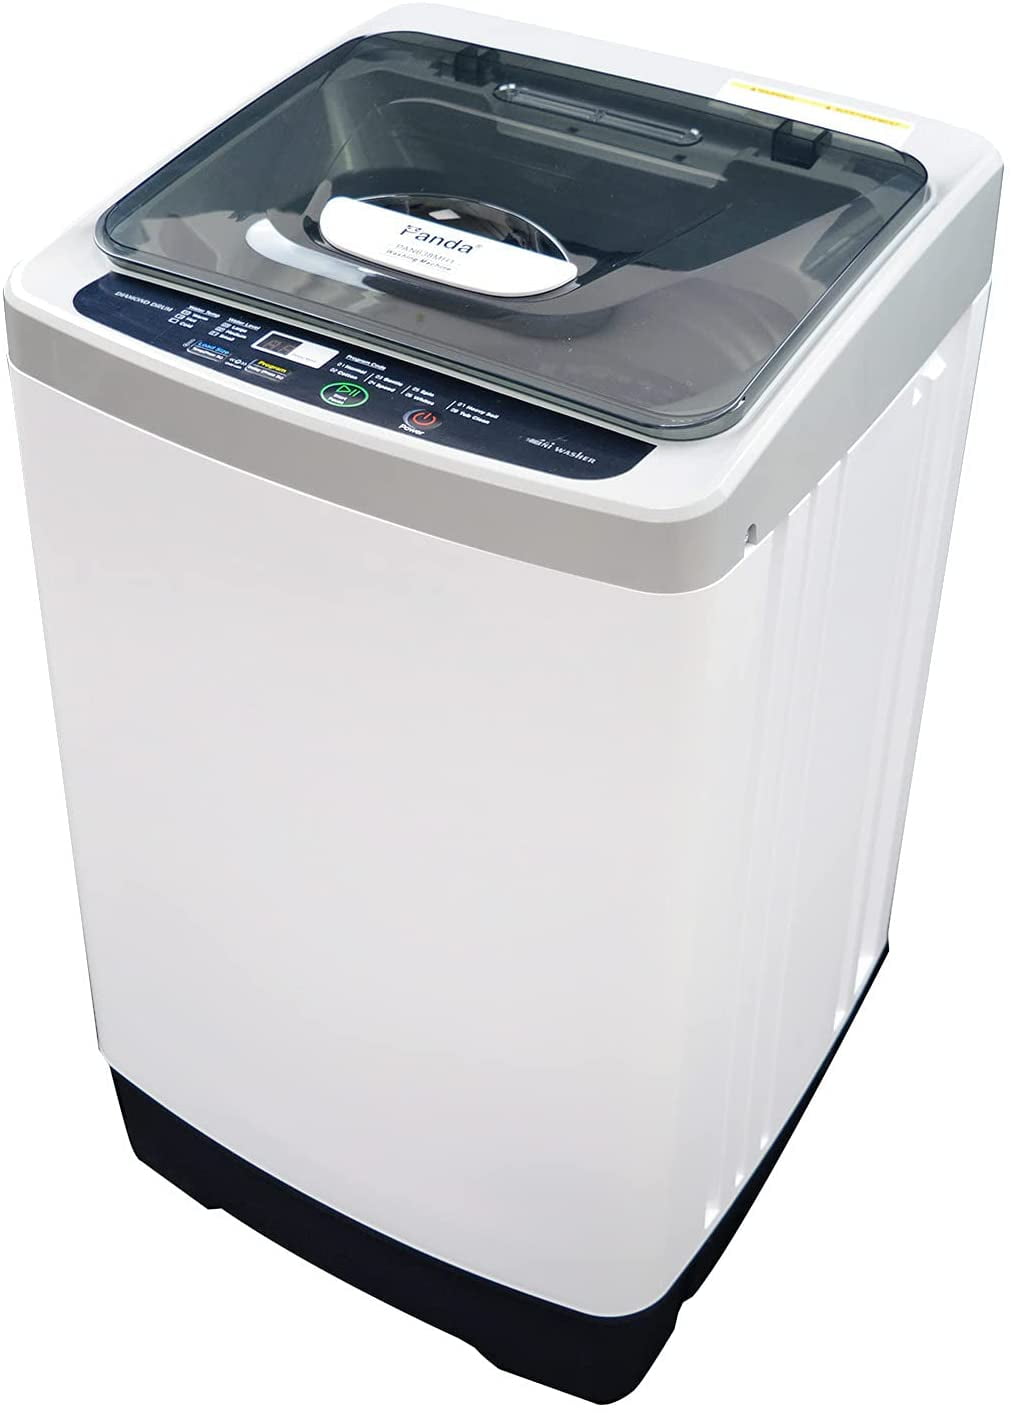 Qhomic Fully Automatic Washing Machine, 17.8lb Large Capacity Portable  Washing Machine with Dual Inlets for Hot and Cold Water, Washer and Dryer  Combo with LED Display & 1 Adjustable feet & Wheels 